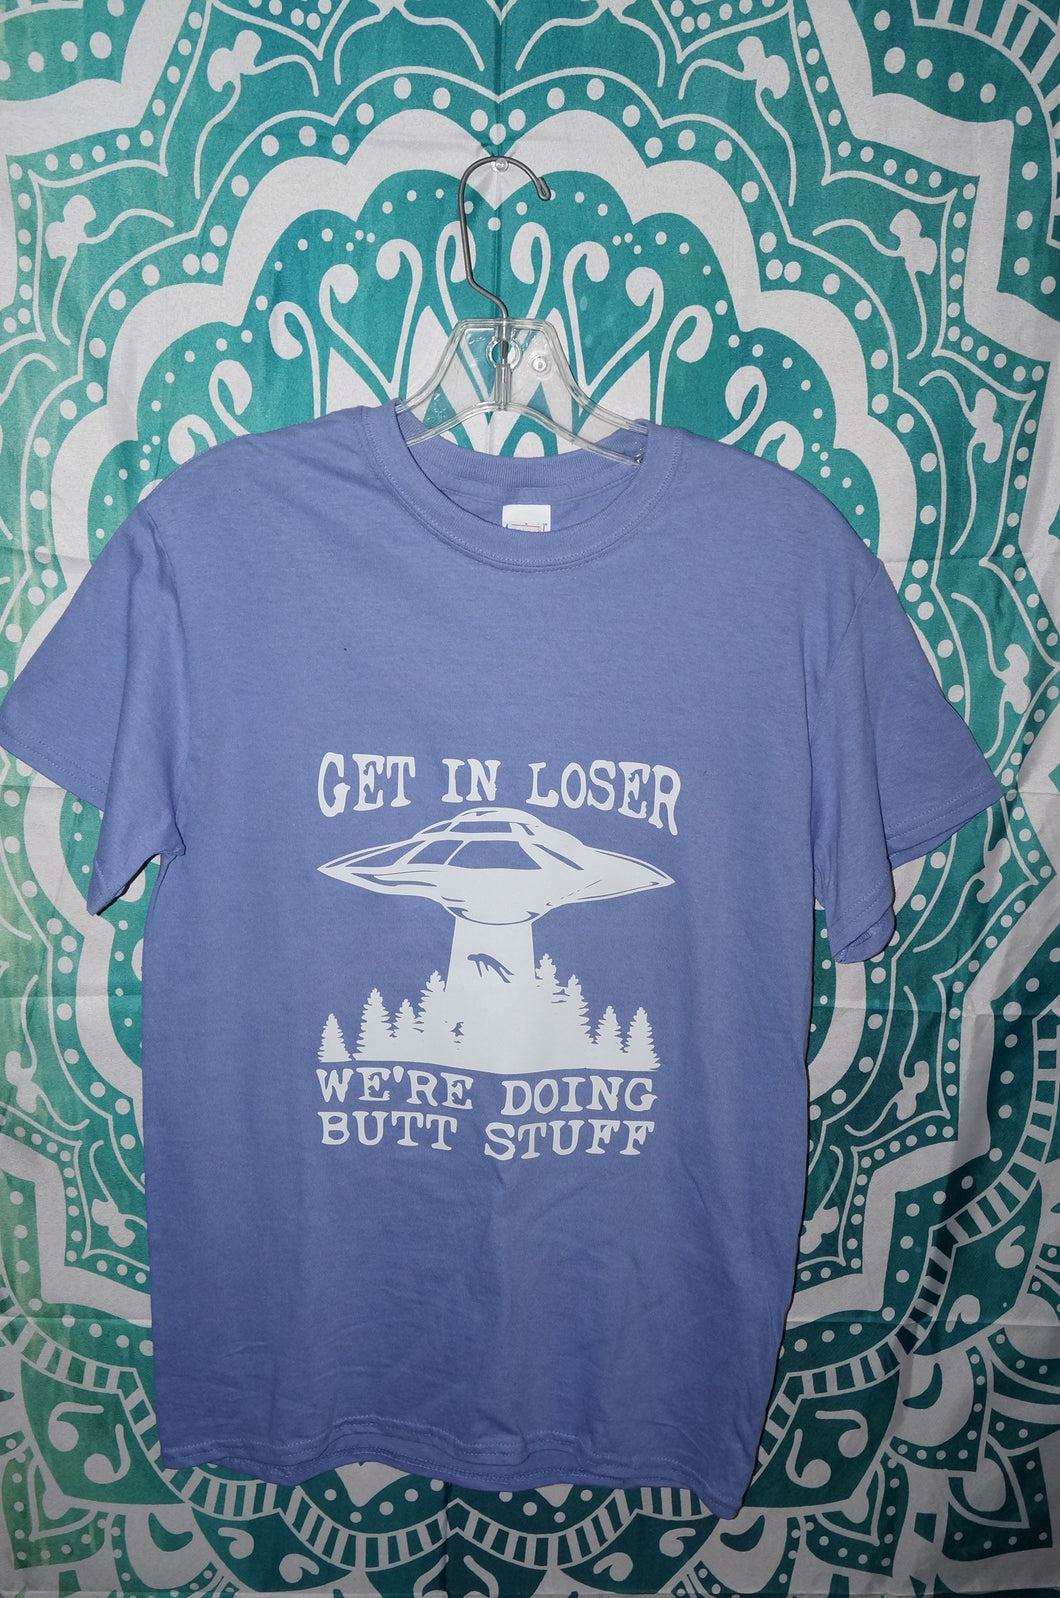 Get in loser were doing butt stuff! Size Small - Caliculturesmokeshop.com